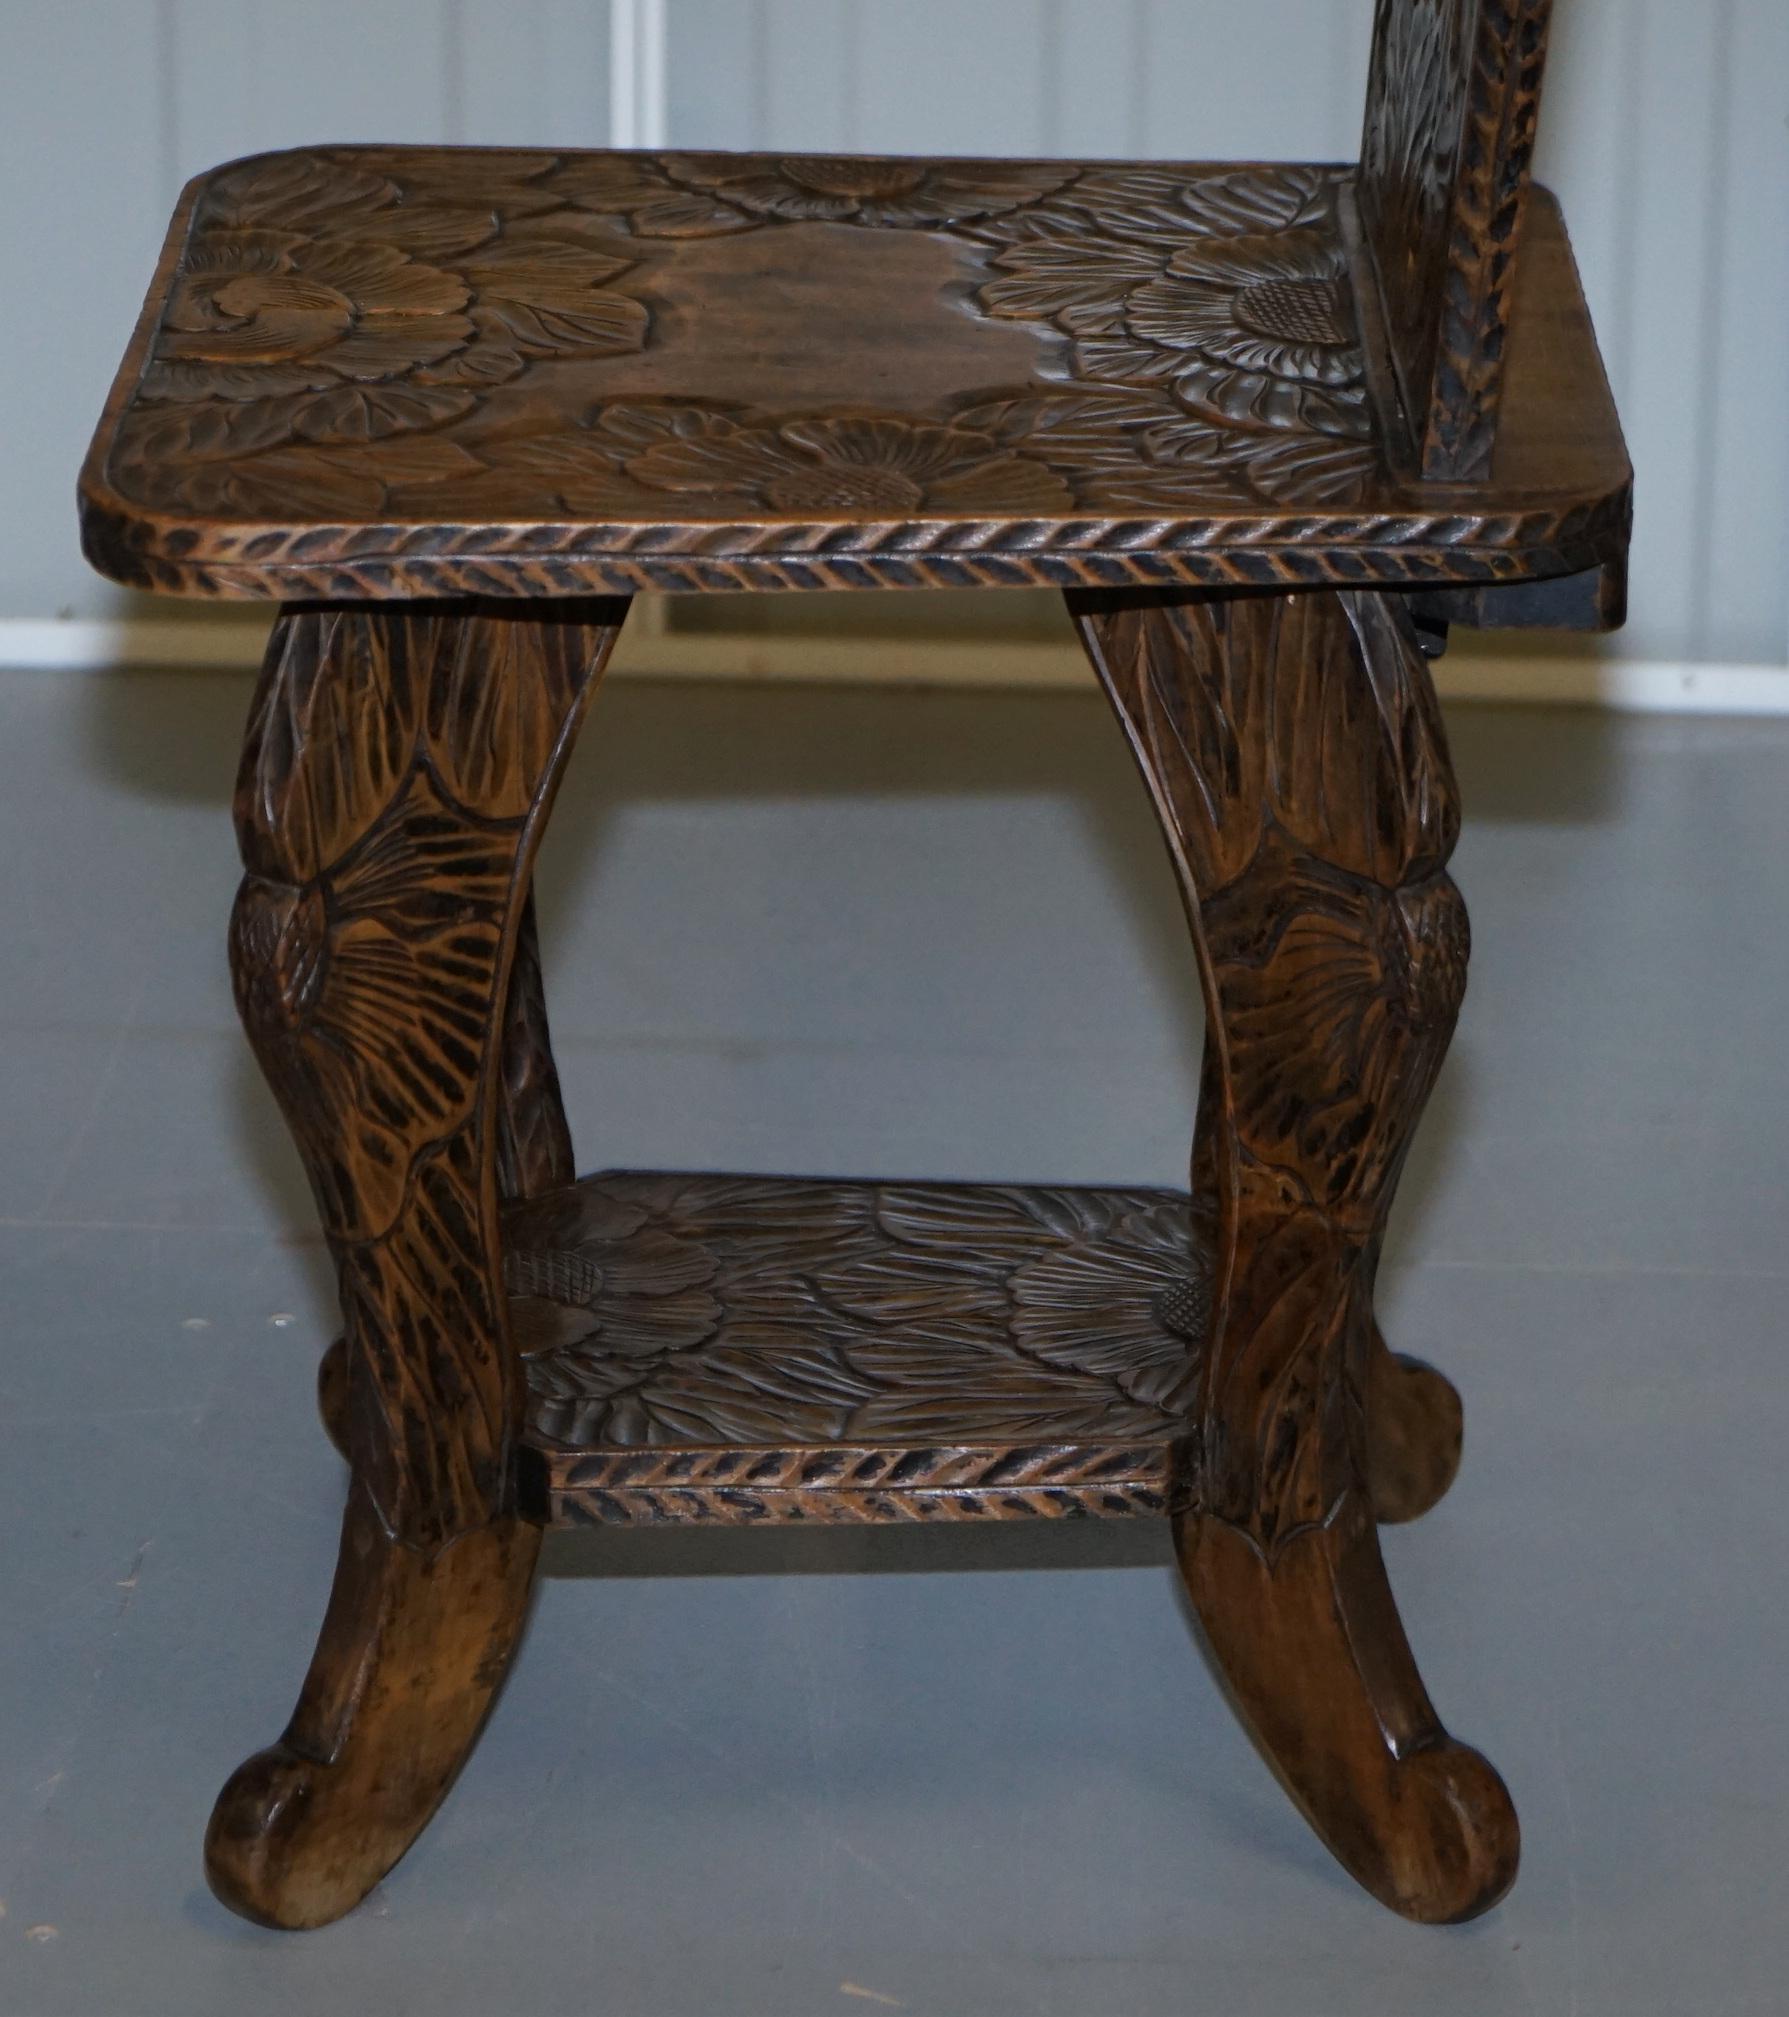 Very Rare Original Liberty's London Signed Qing Dynasty Chair Floral Carving For Sale 9